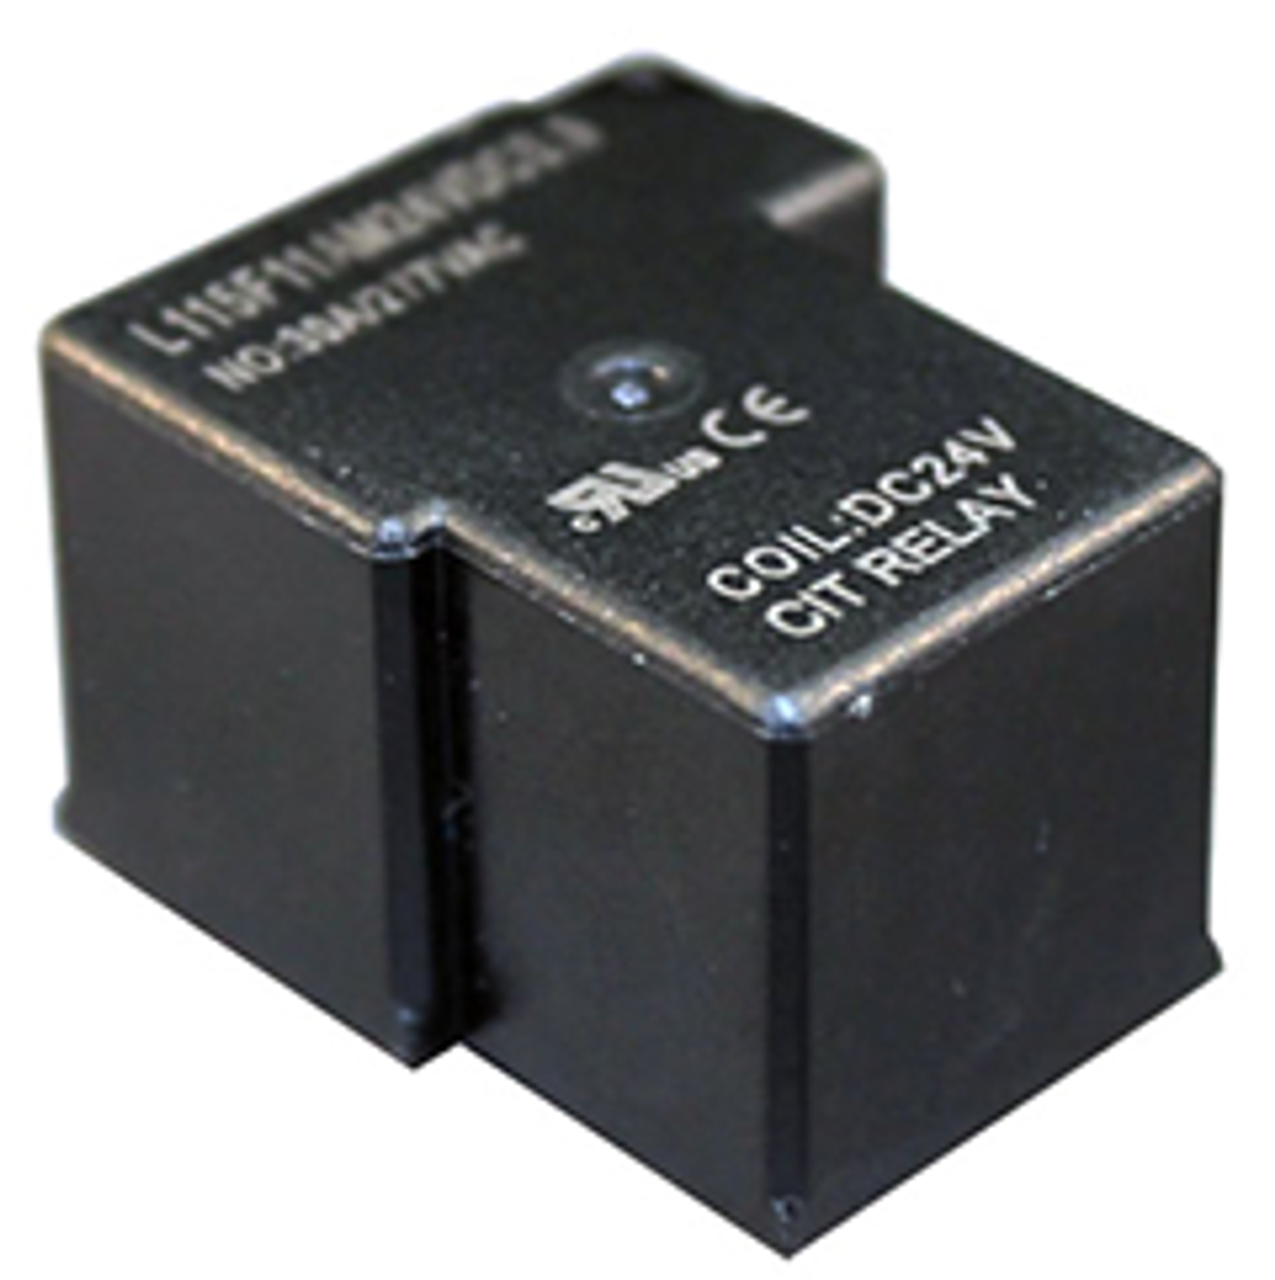 CIT Relay and Switch L115F11CK5VDCN.9 Latching Relays